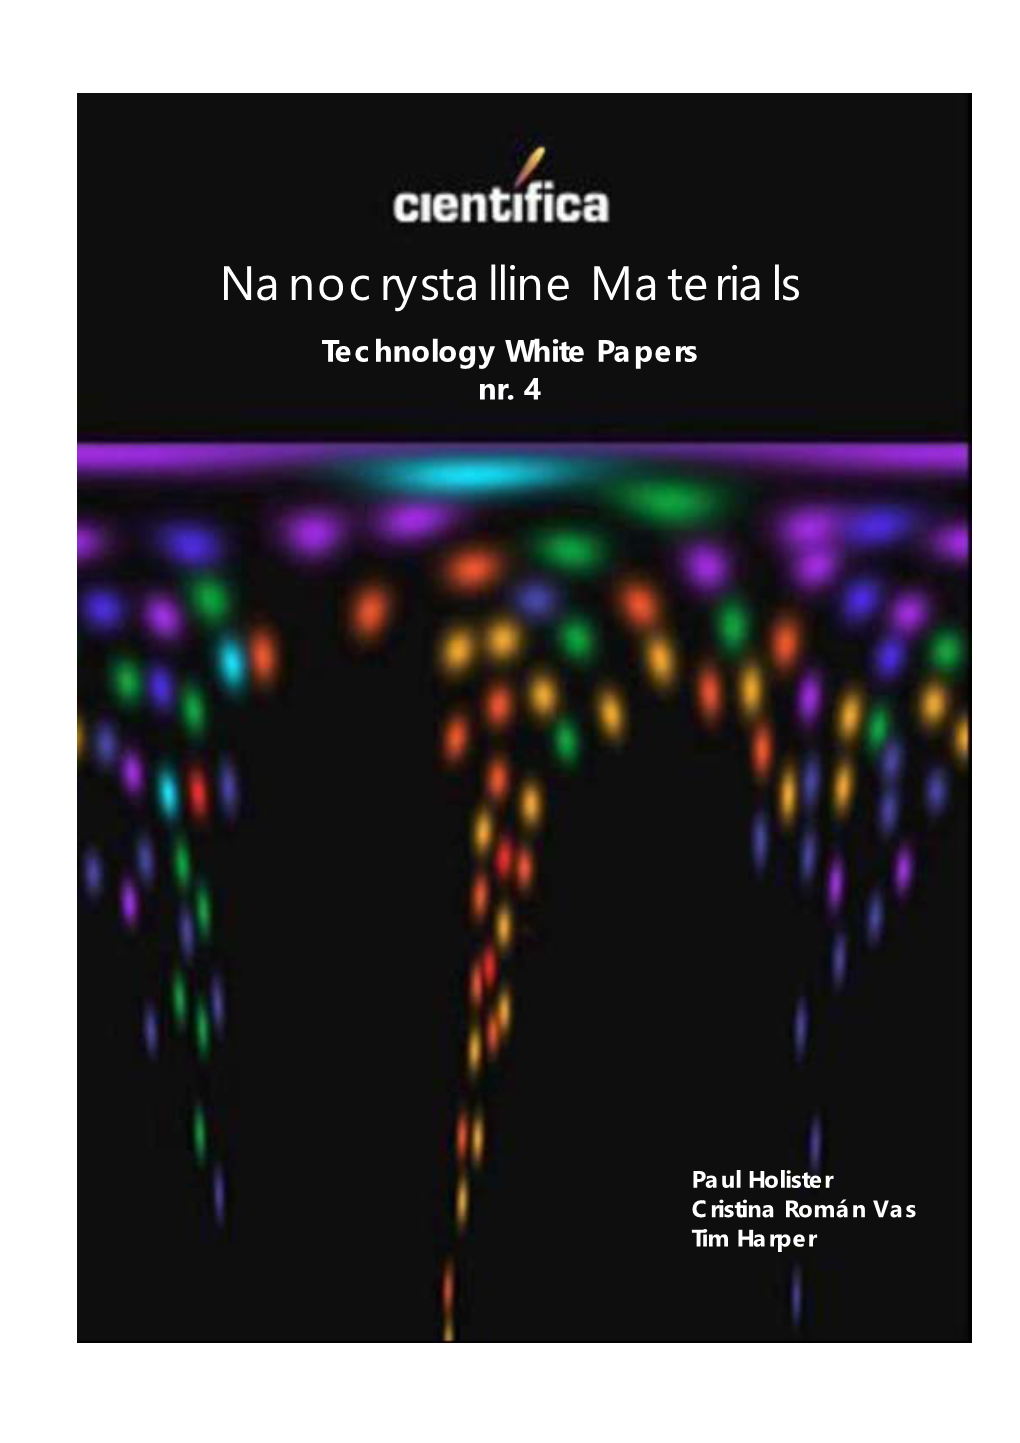 Nanocrystalline Materials Technology White Papers Nr